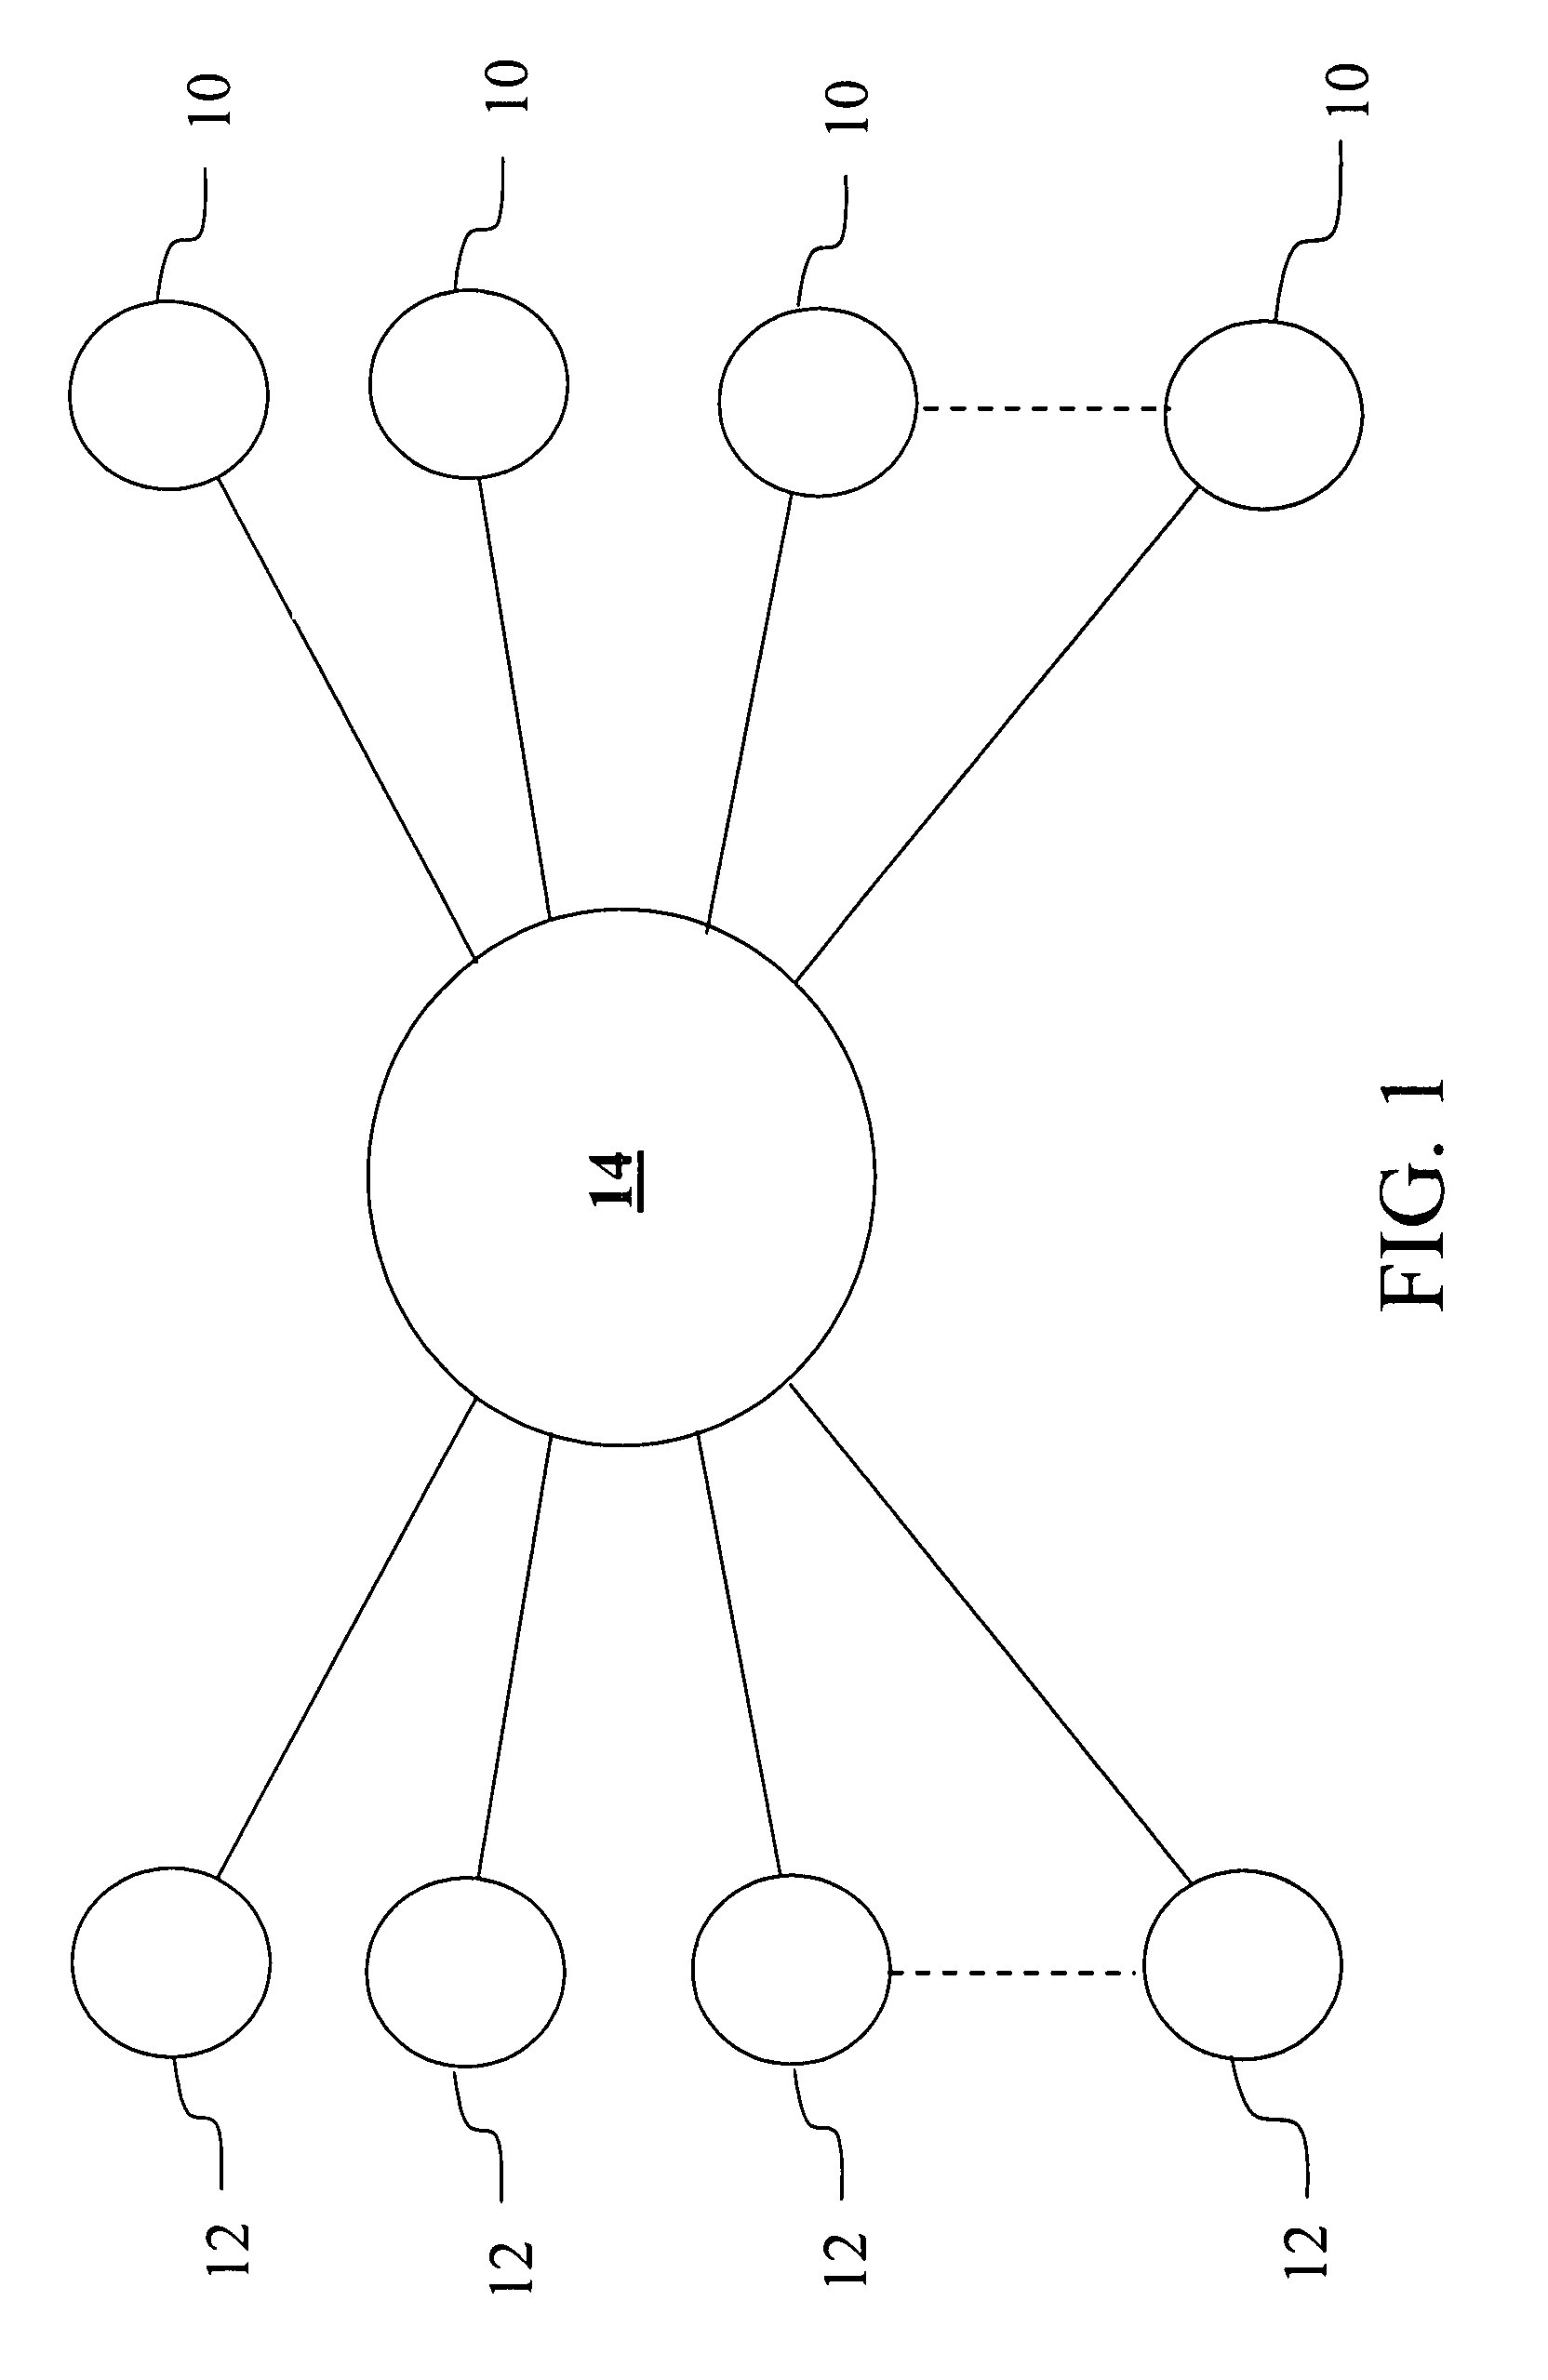 System and method for auctioning services over an information exchange network